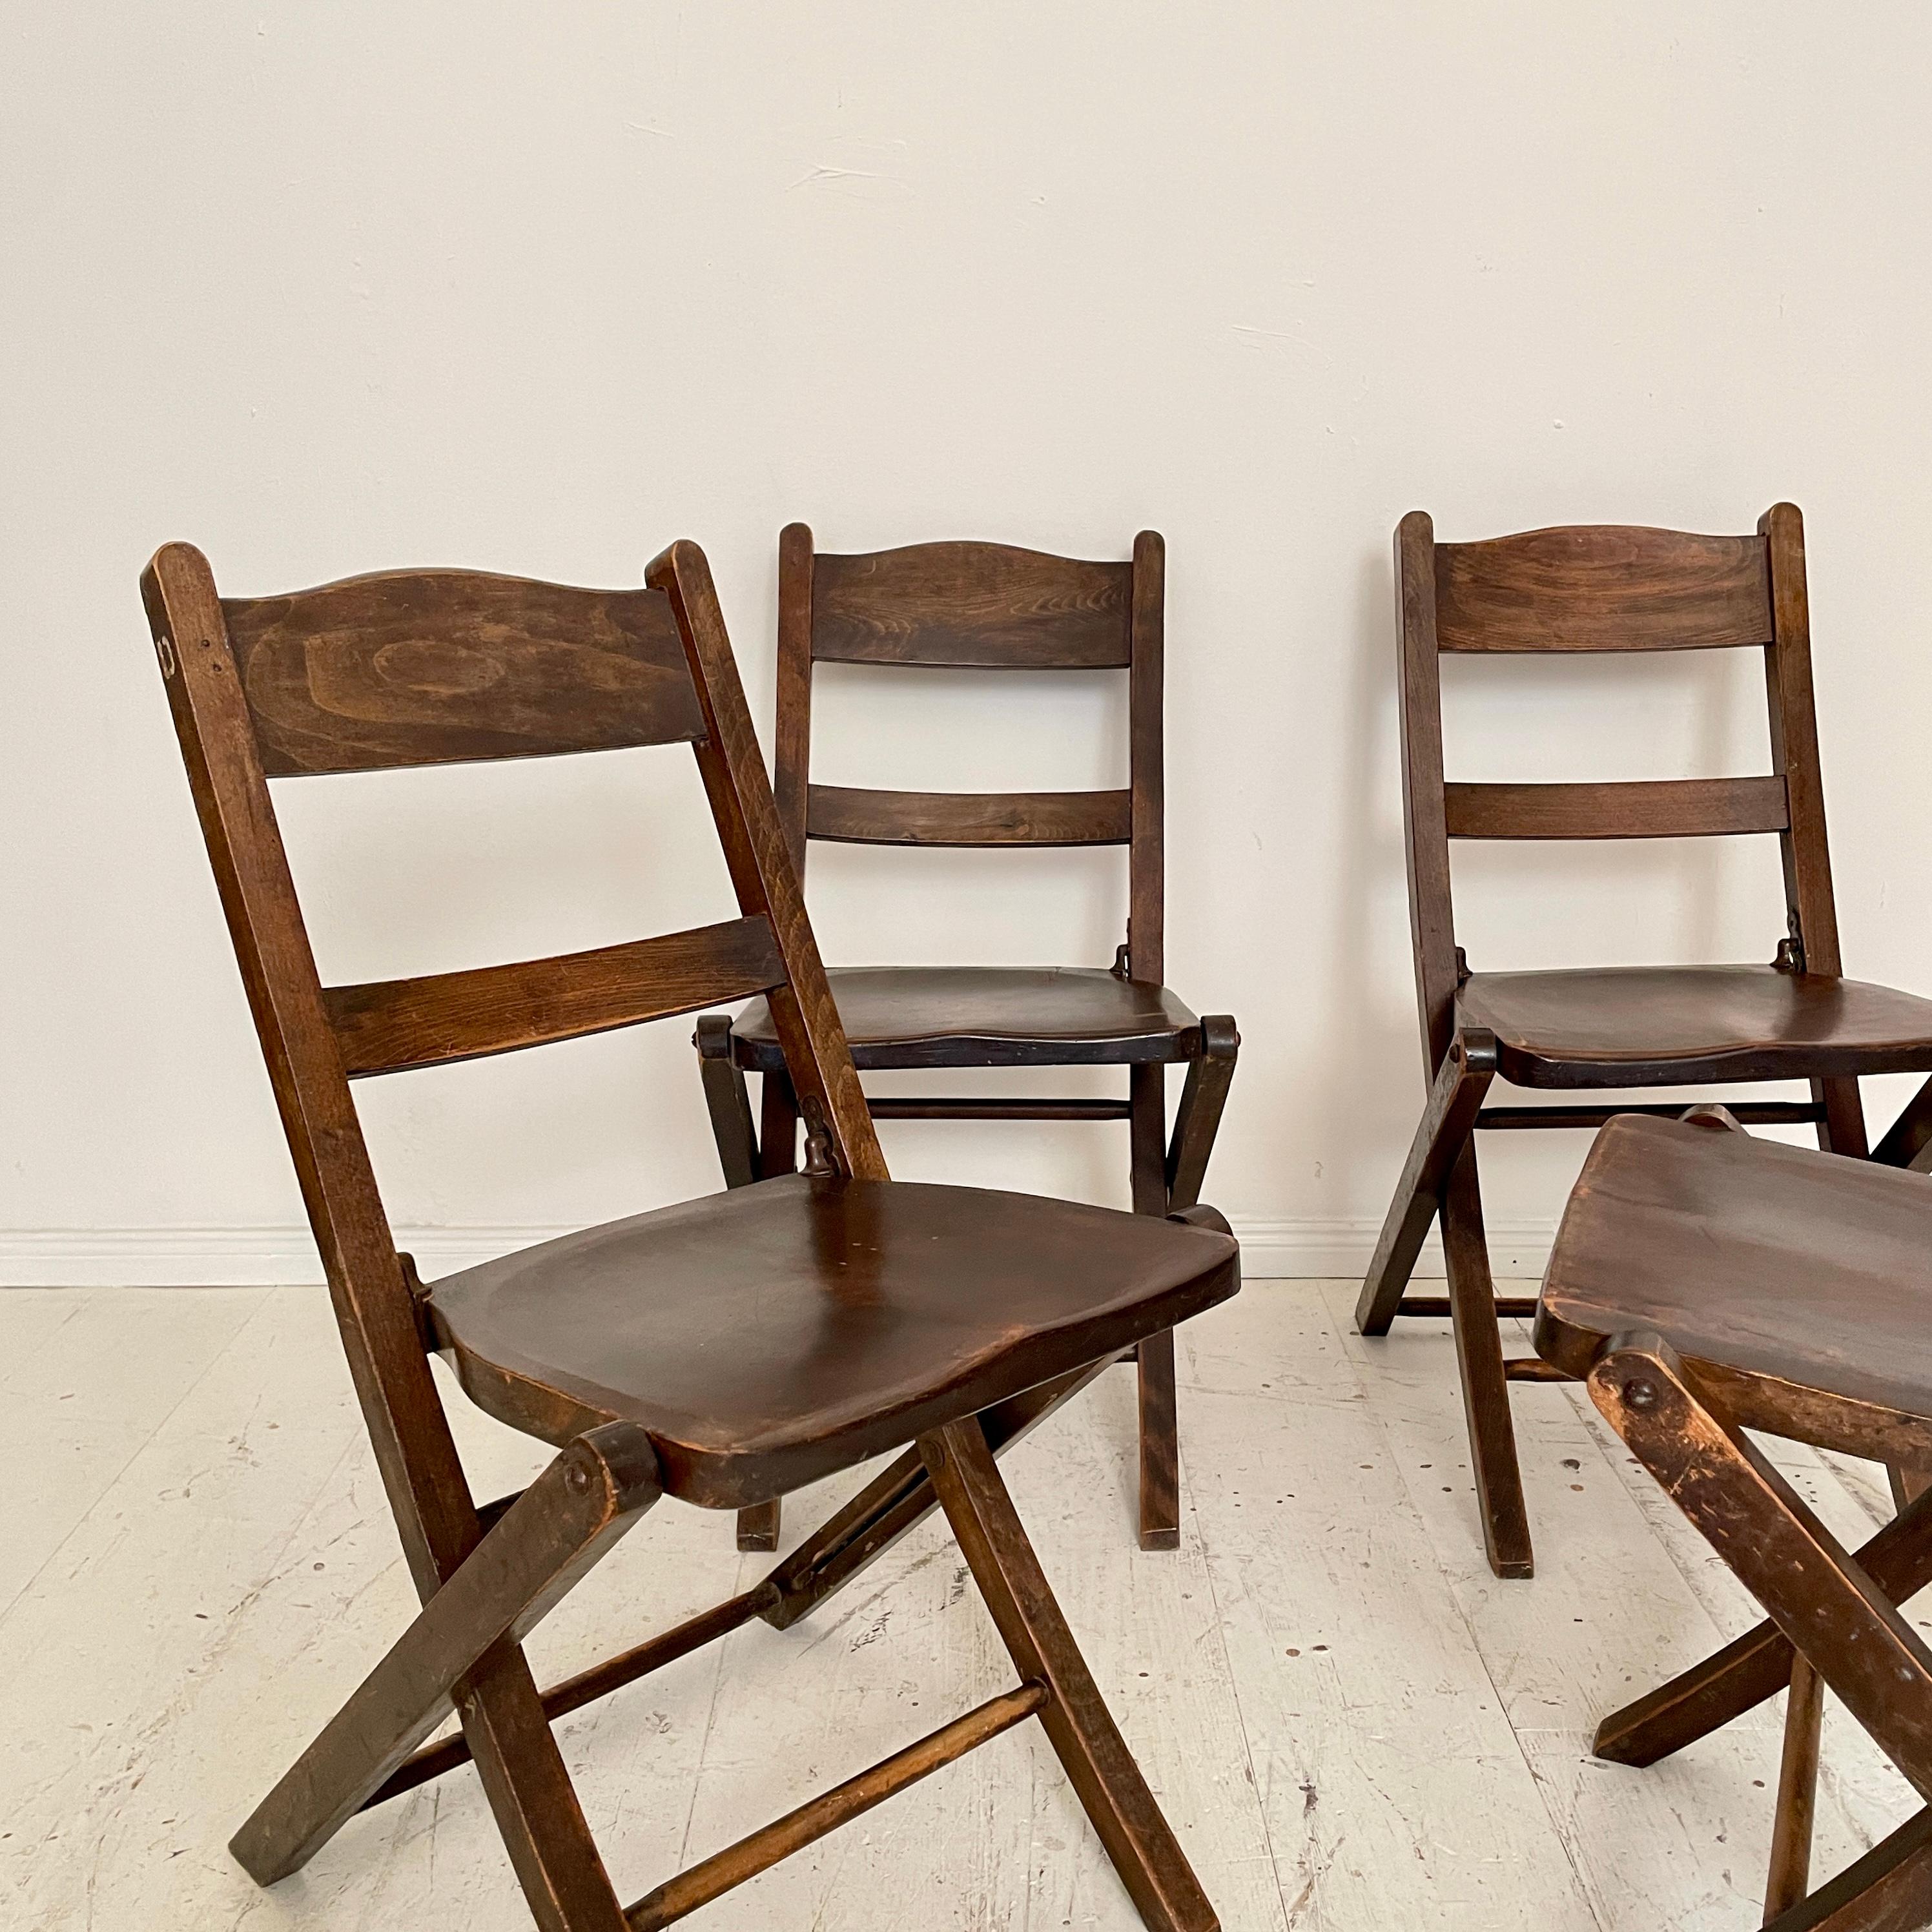 German Set of 4 Art Deco Folding Chairs in Brown Beech and Ash, around 1930 For Sale